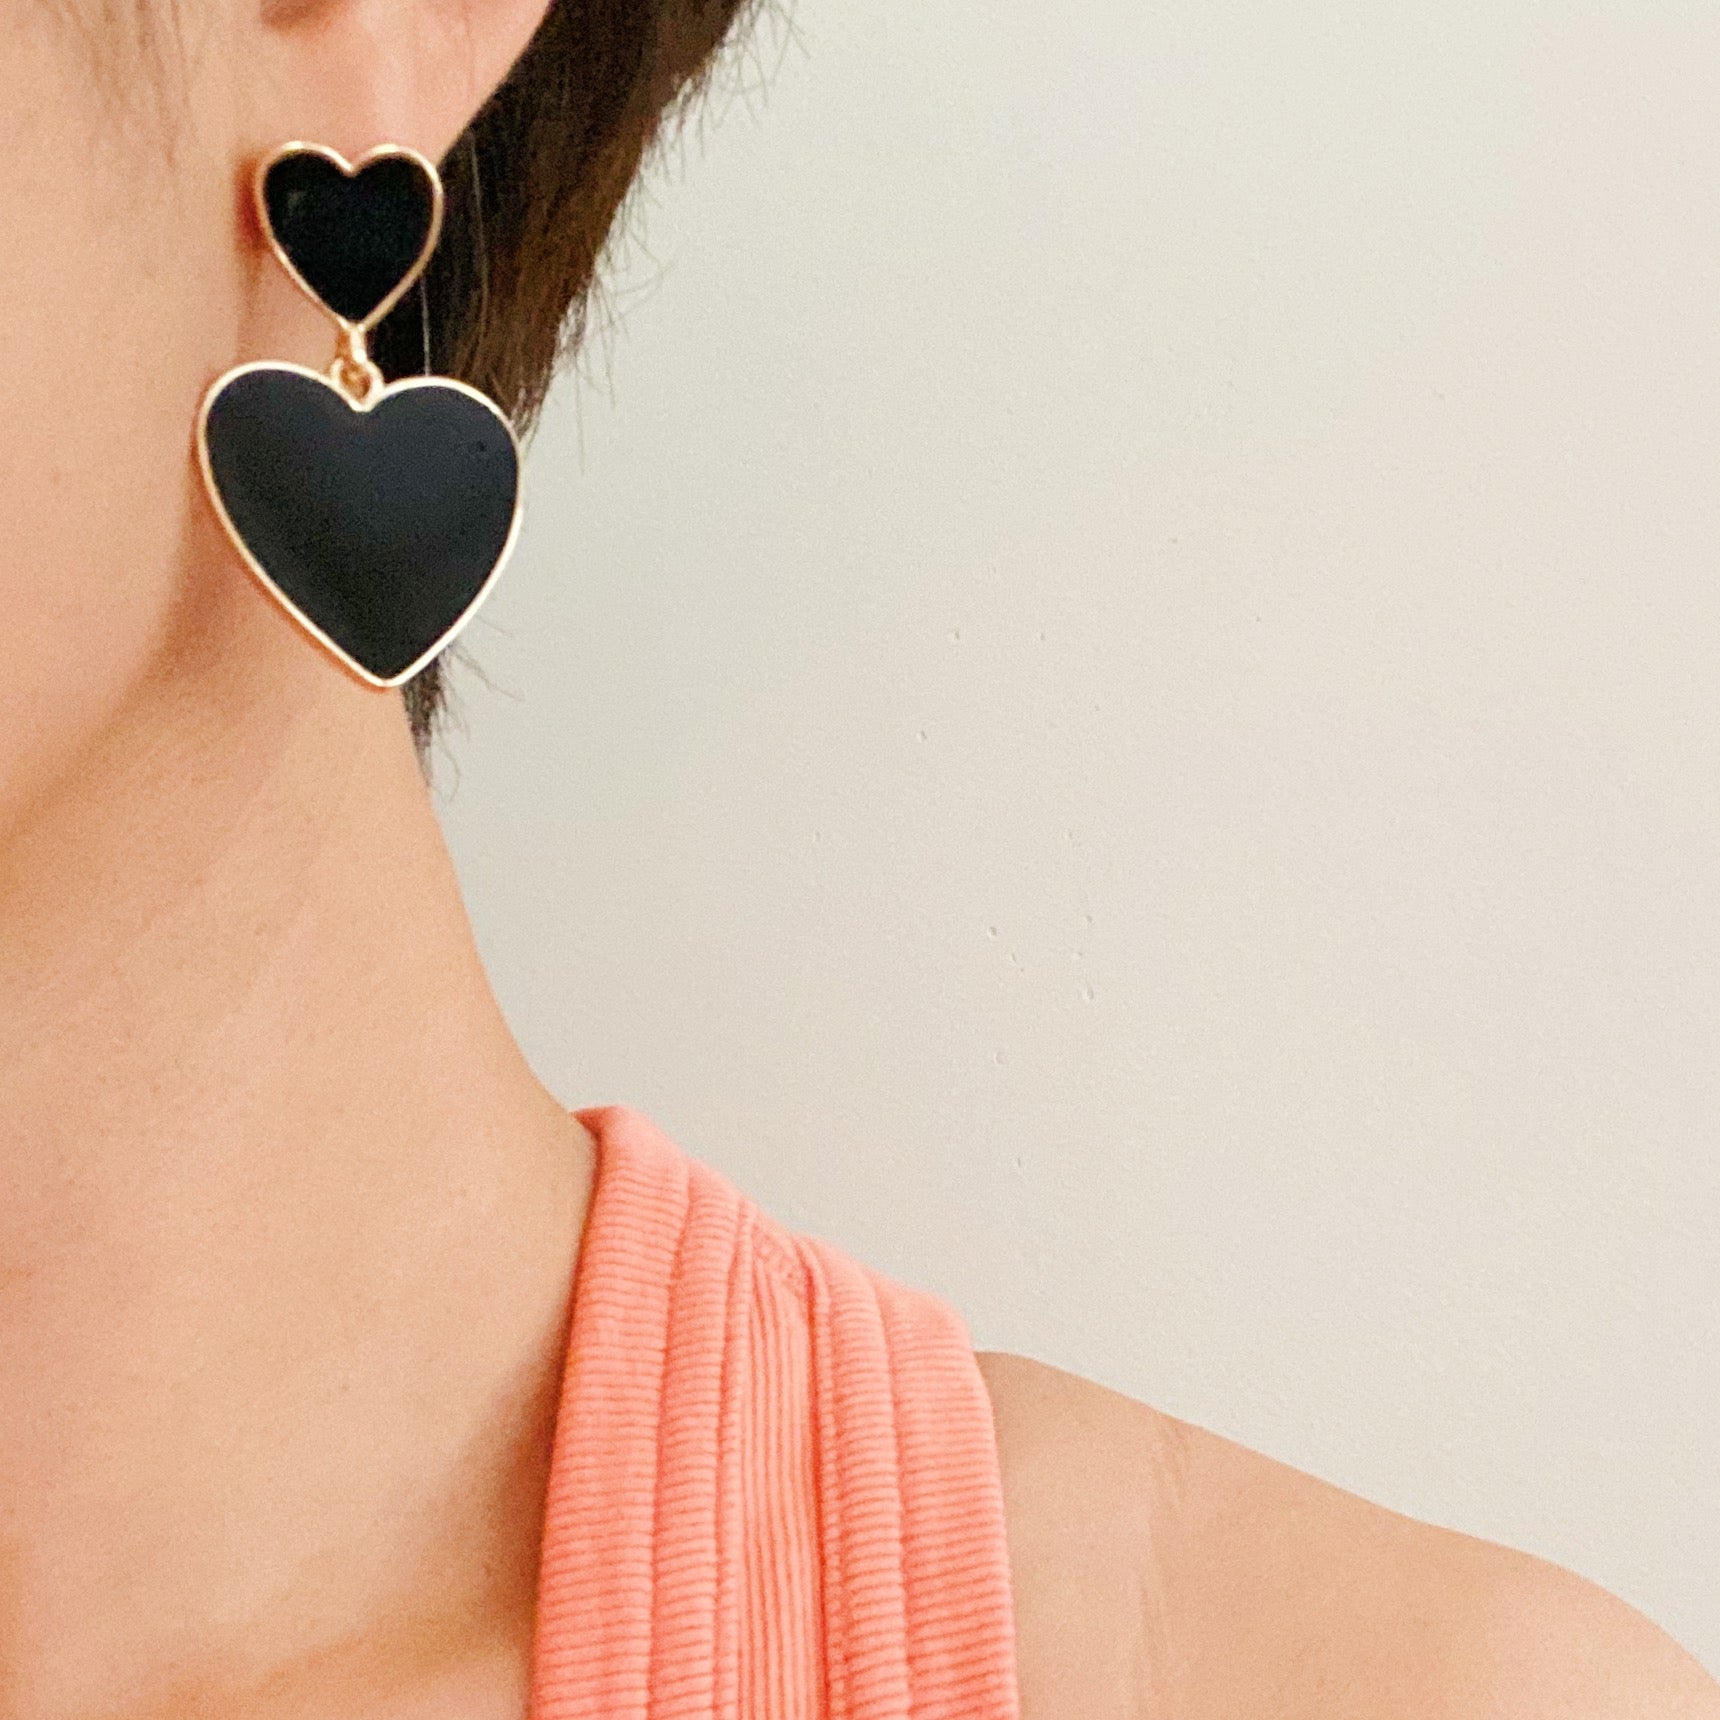 Heart For Game Day Earrings - The Kindness Cause